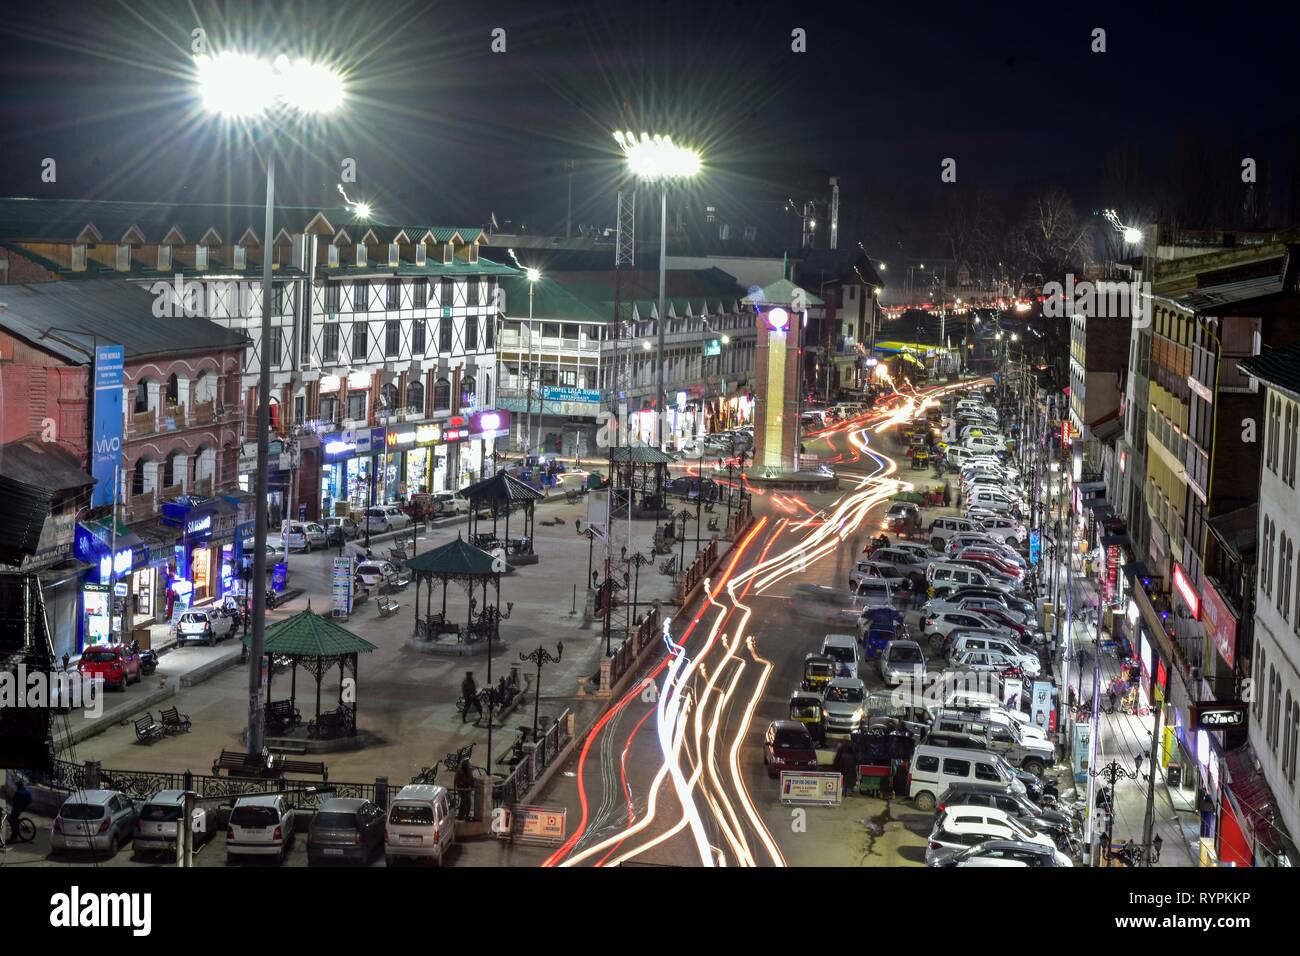 A late night view of commercial hub Lal chowk in Srinagar, Kashmir. Kashmir is the northernmost geographical region of the Indian subcontinent. It is currently a disputed territory, administered by three countries: India, Pakistan and China. Stock Photo